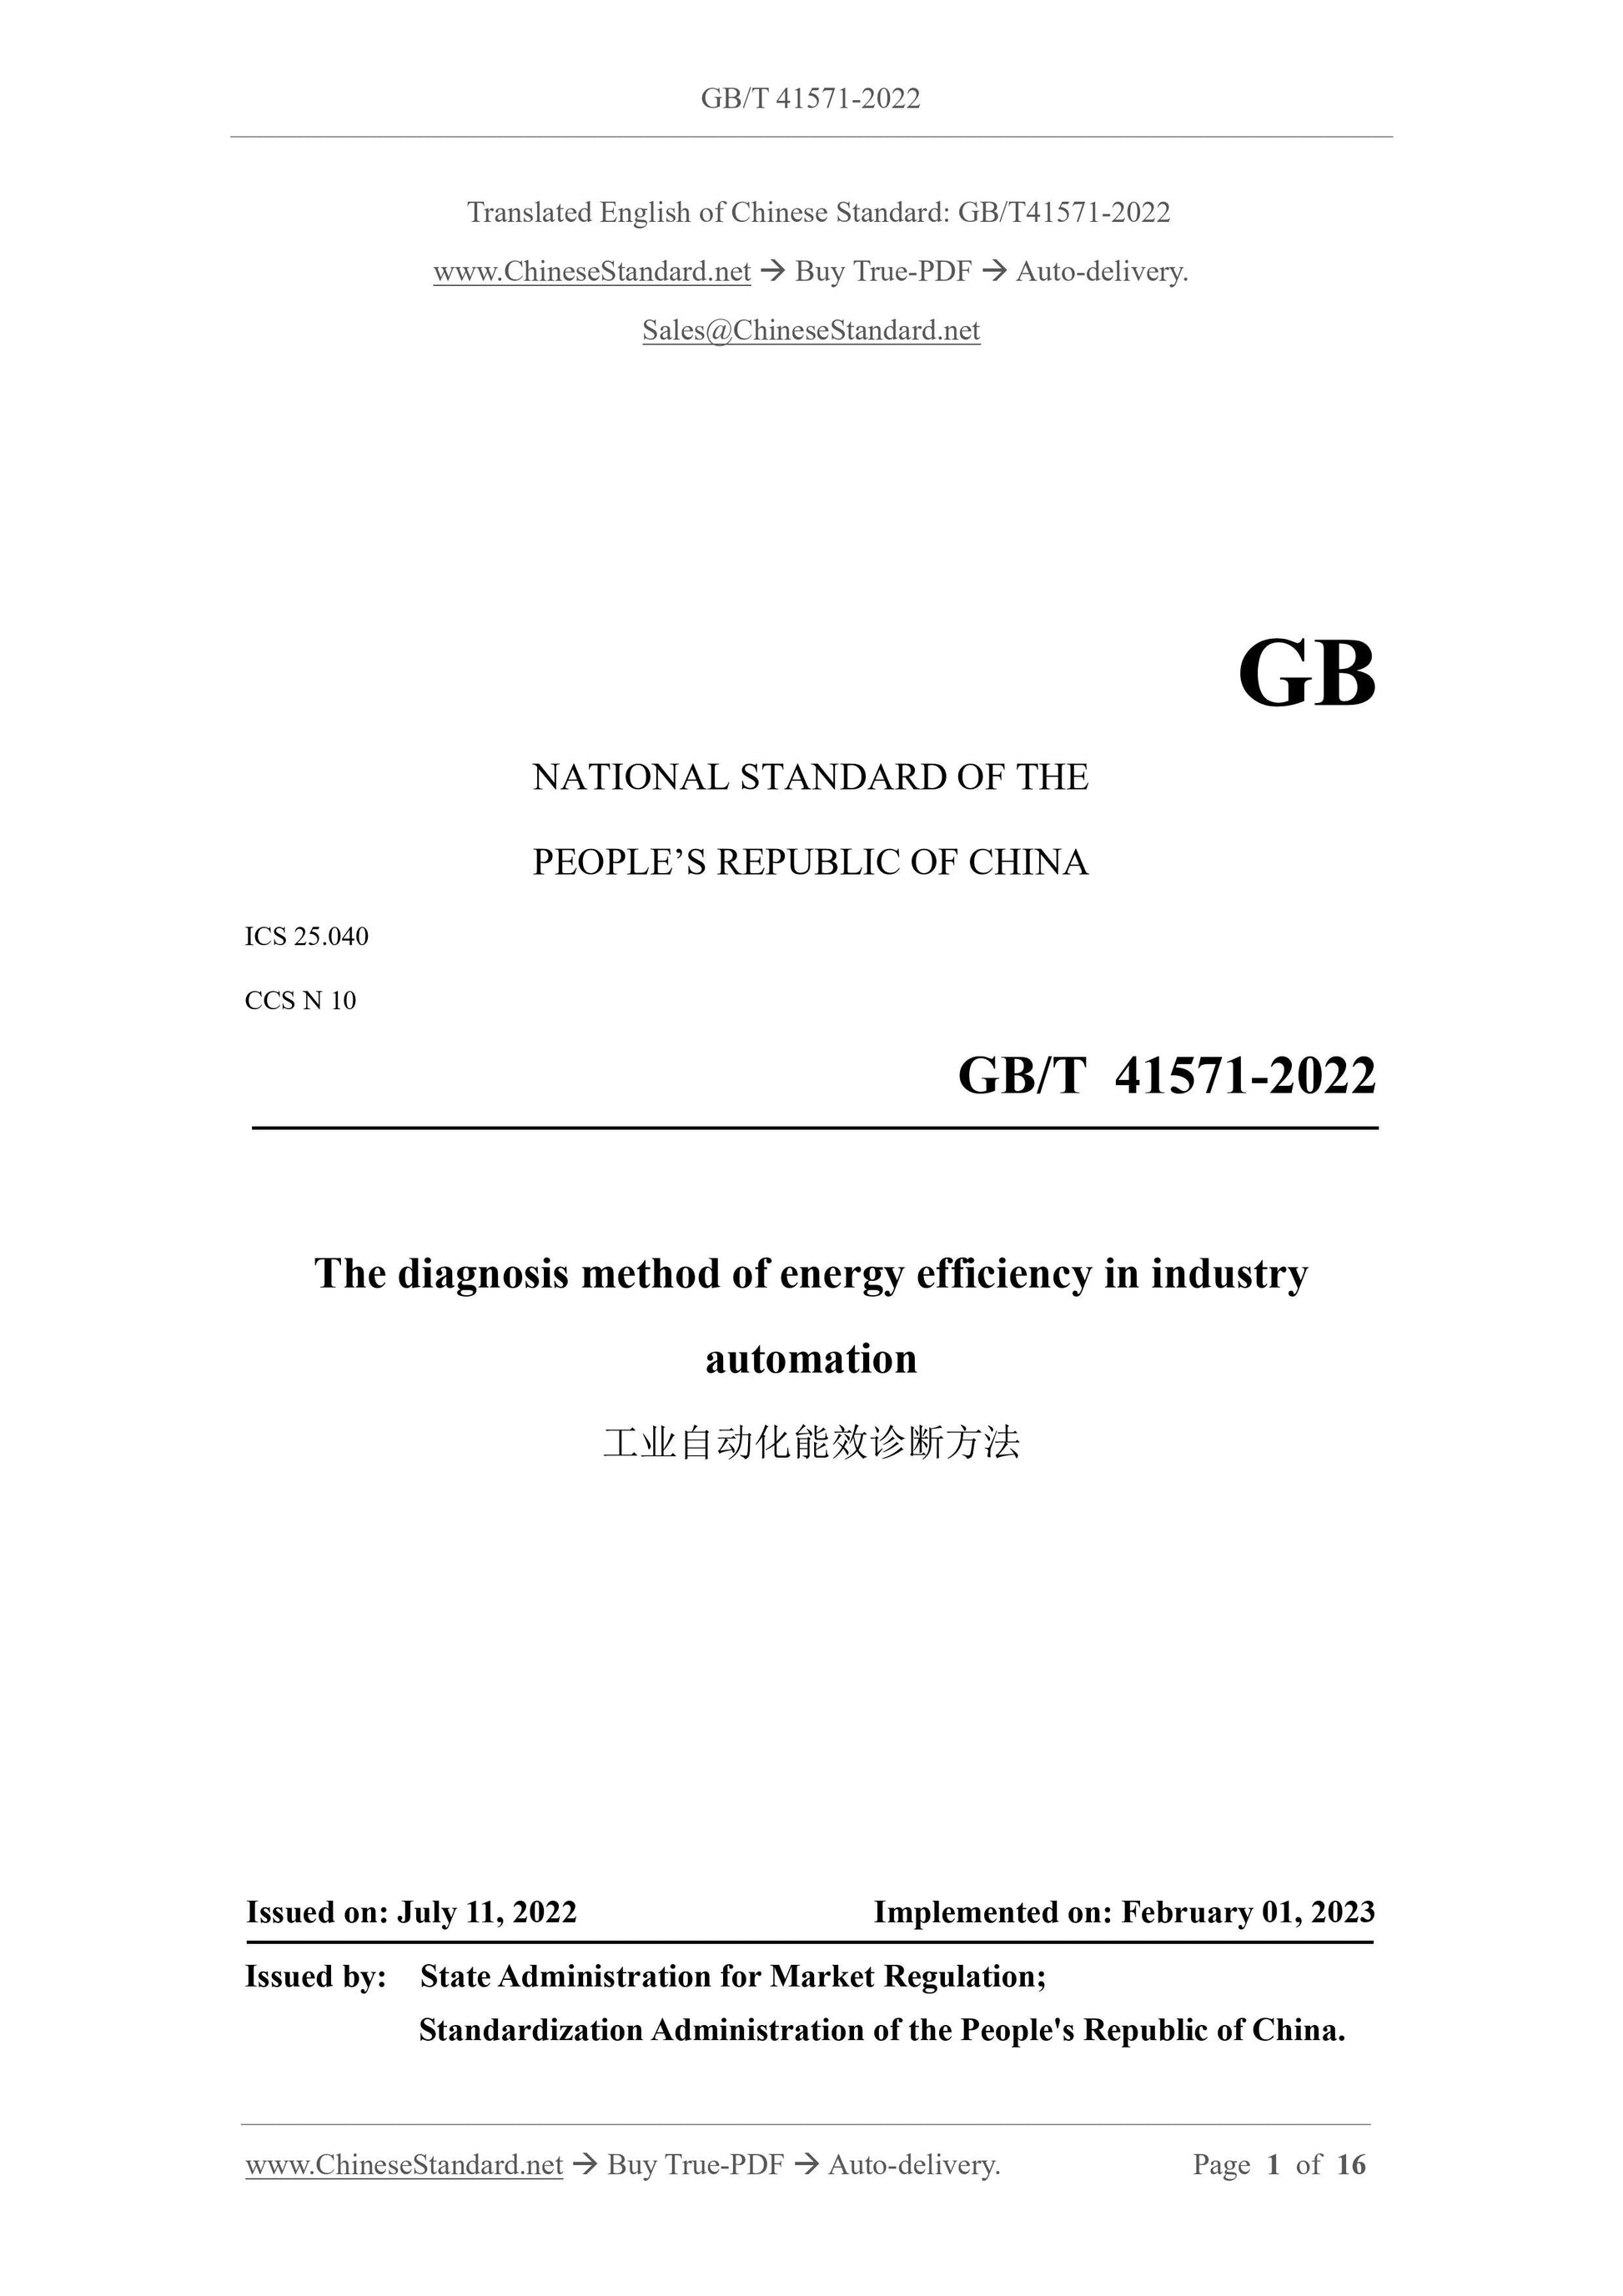 GB/T 41571-2022 Page 1